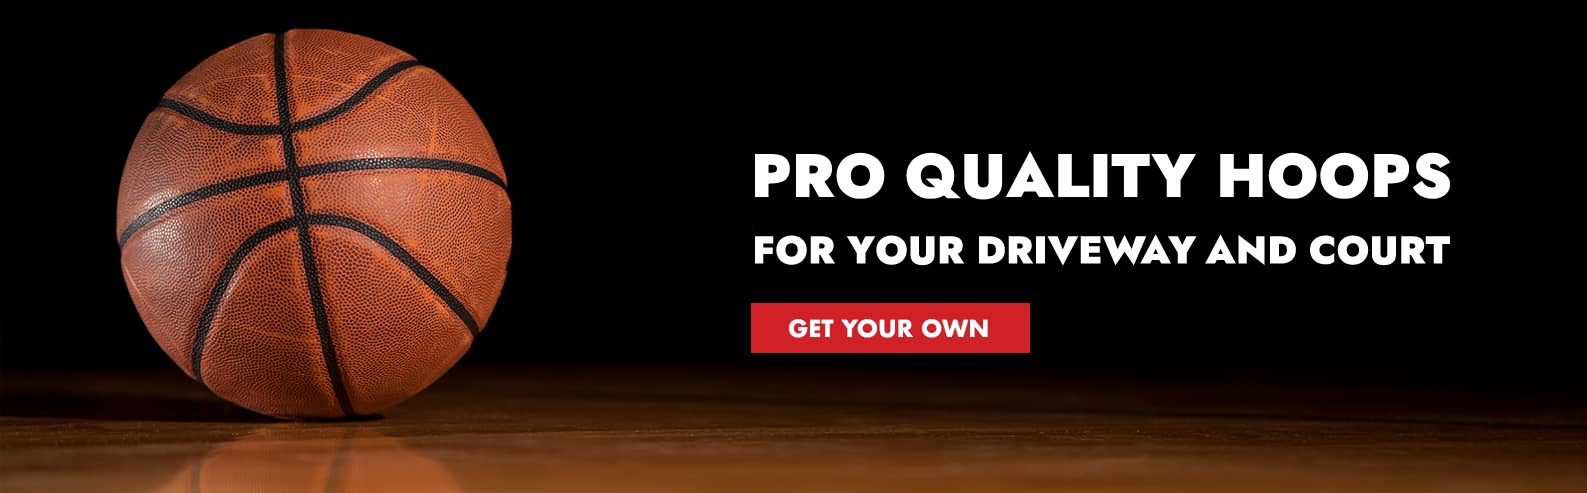 pro quality hoops for your driveway and court